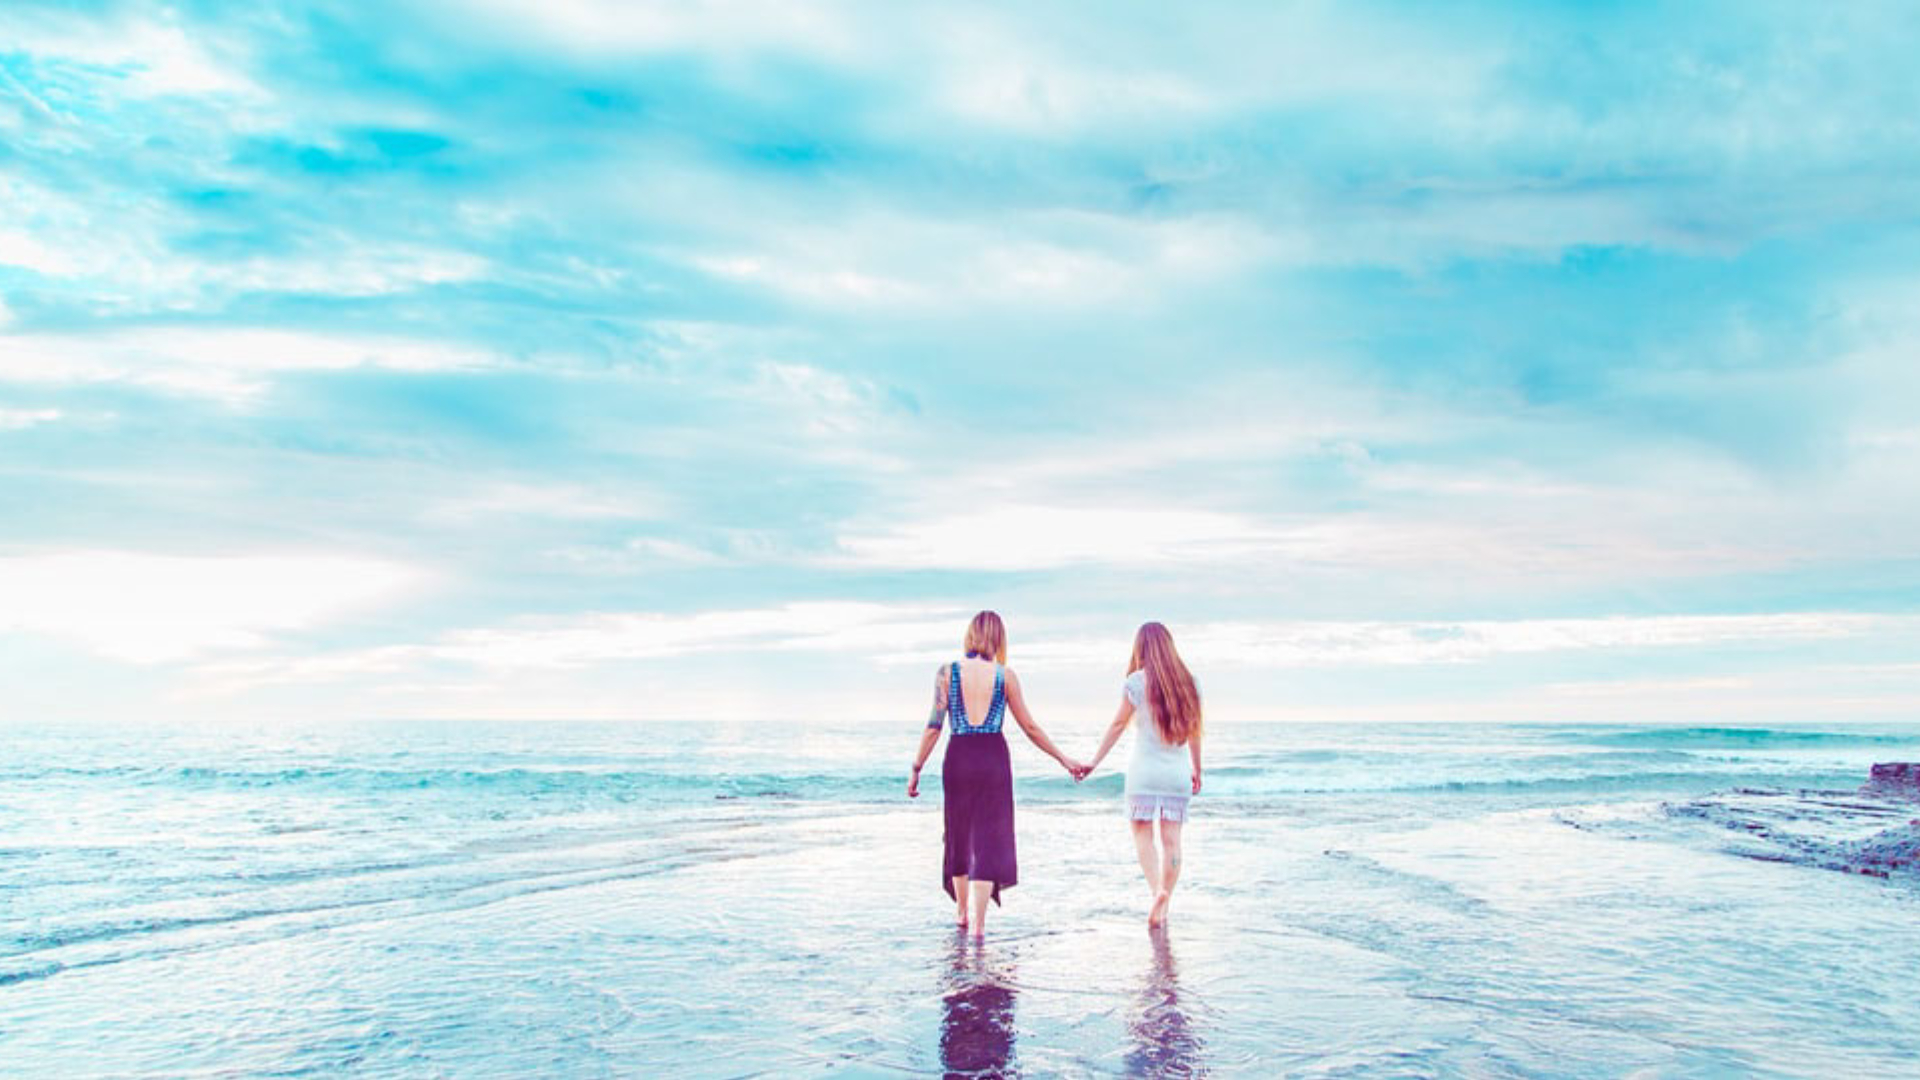 Two women holding hands on the beach